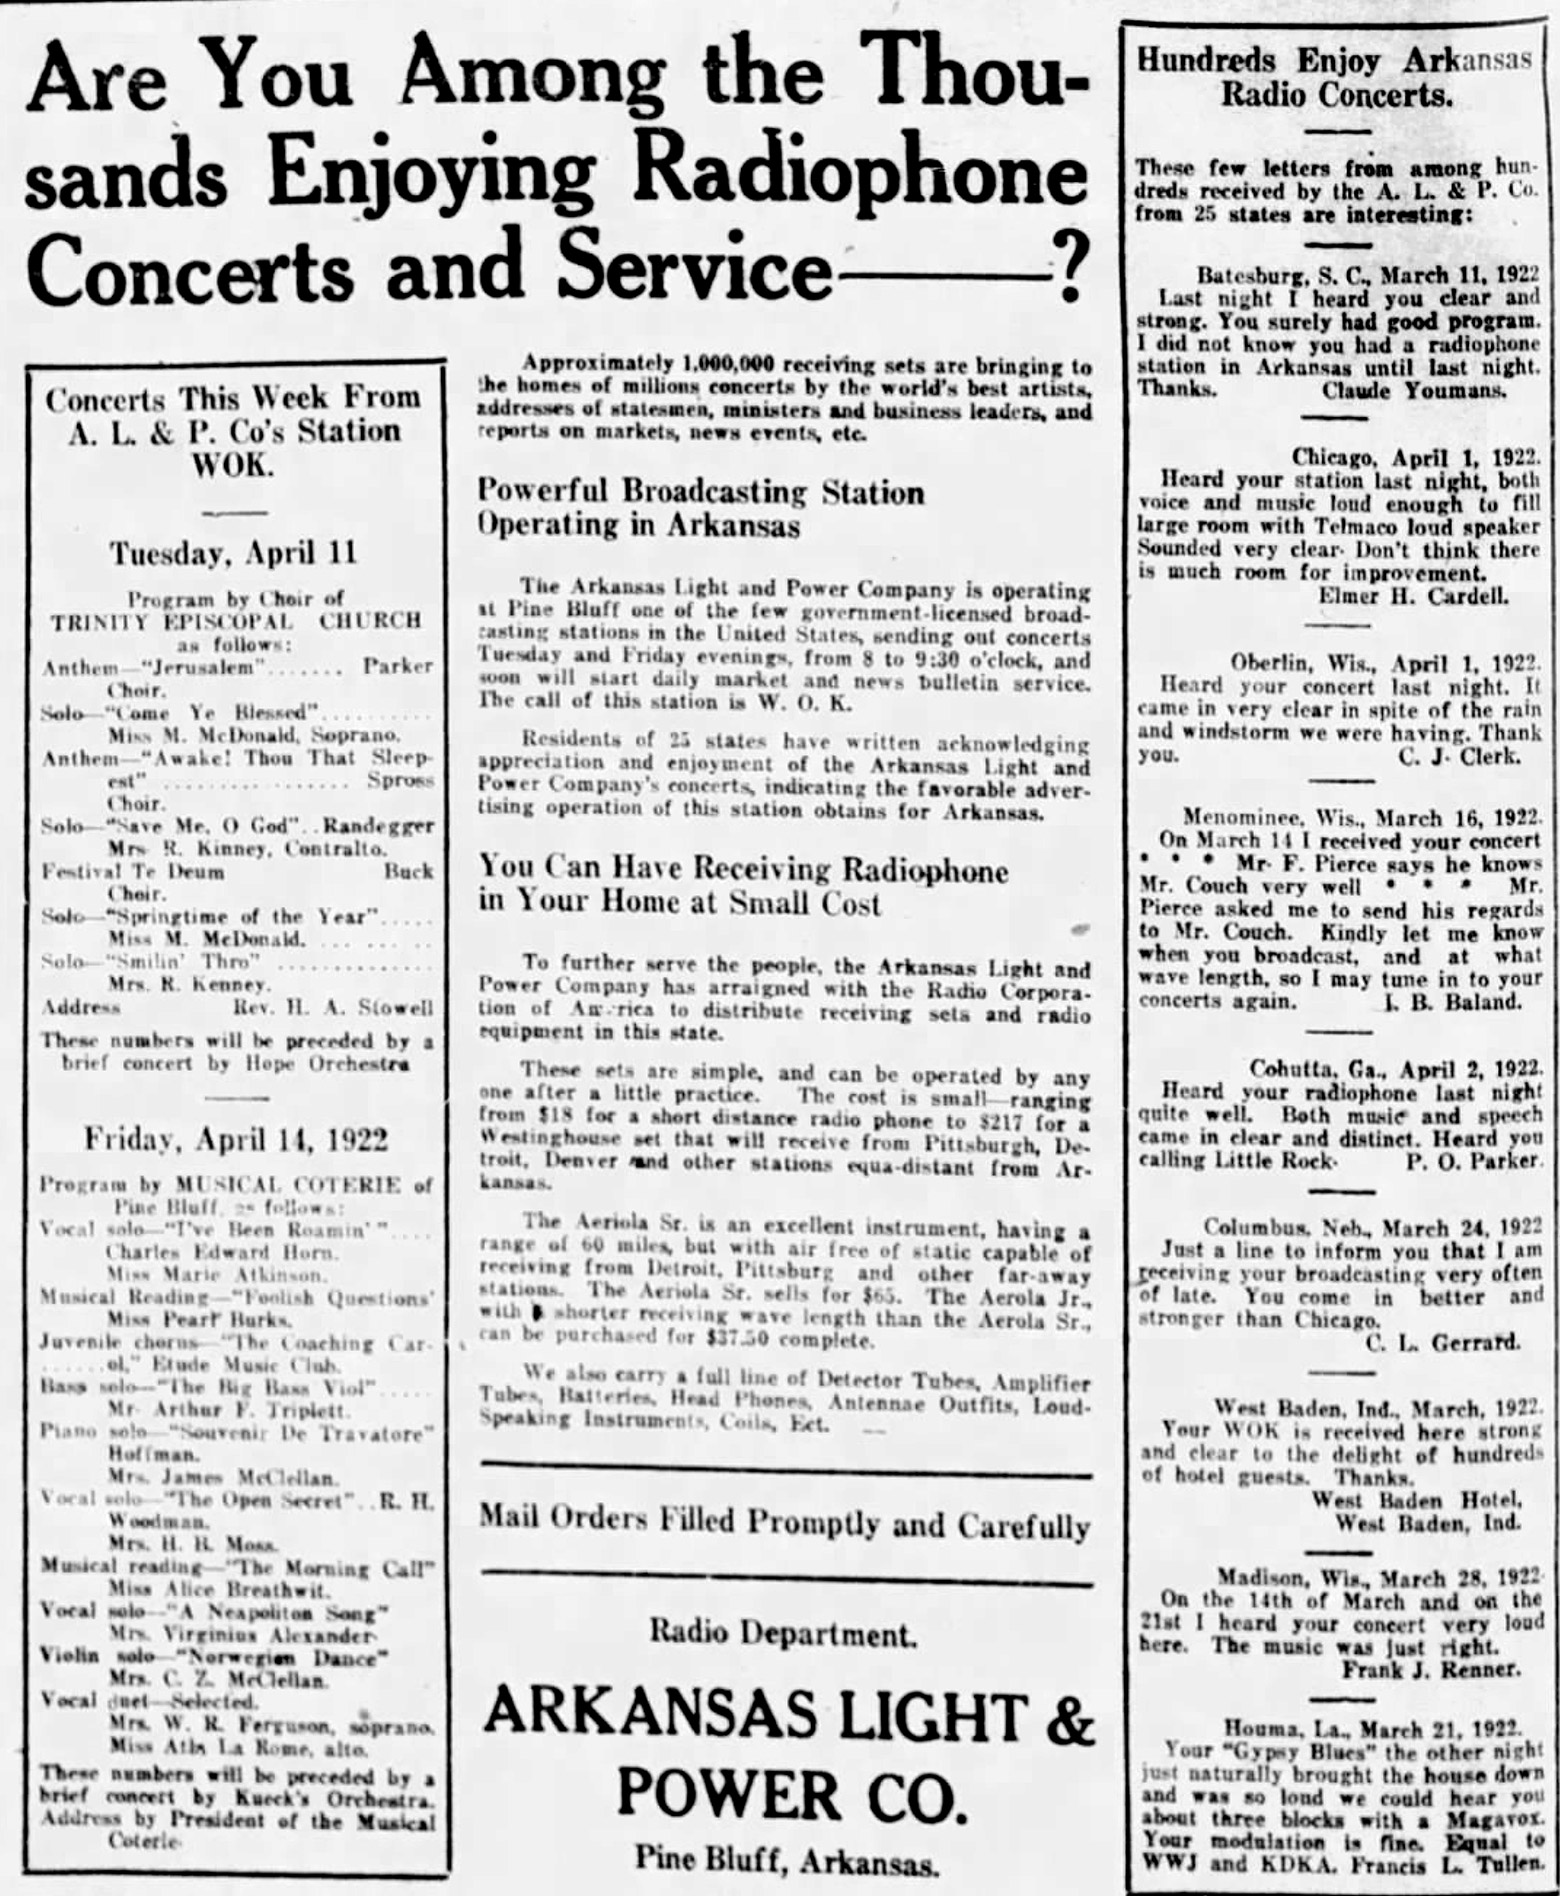 "Are you among the thousands enjoying radiophone concerts and service?" newspaper clipping